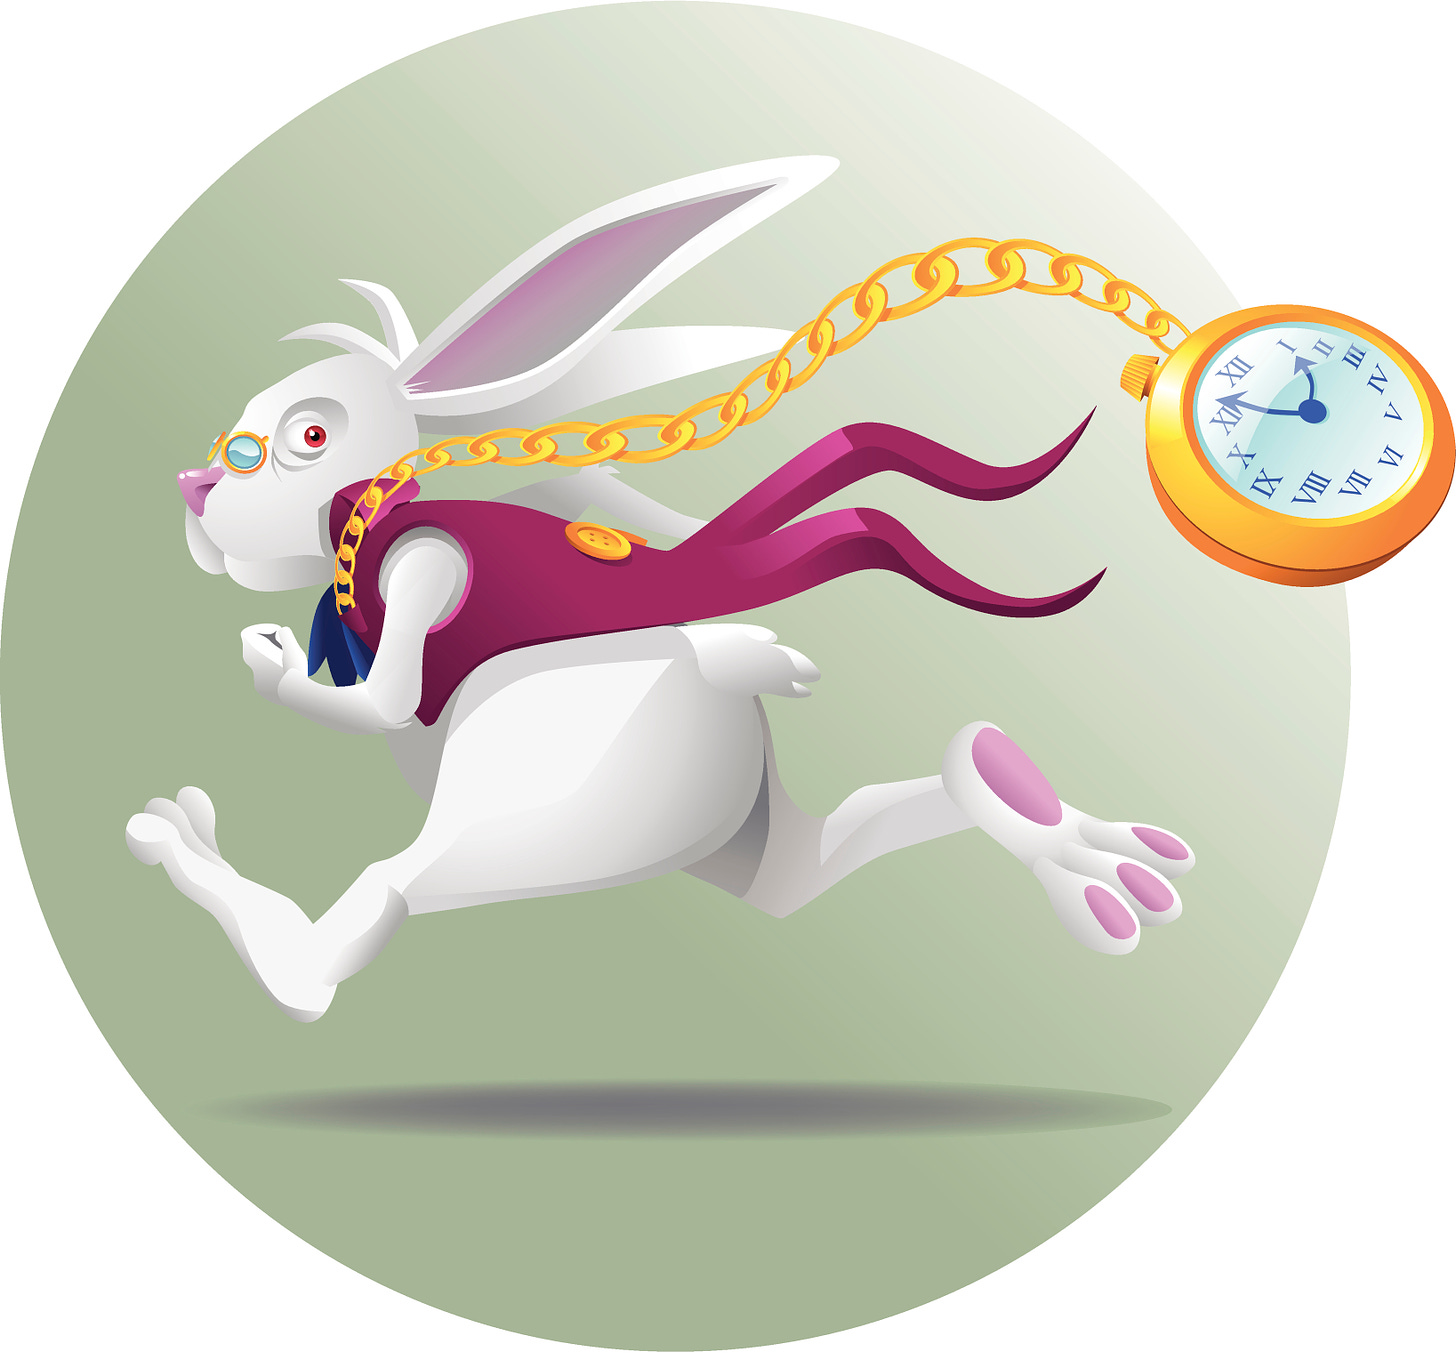 A white rabbit running away with a pocket watch